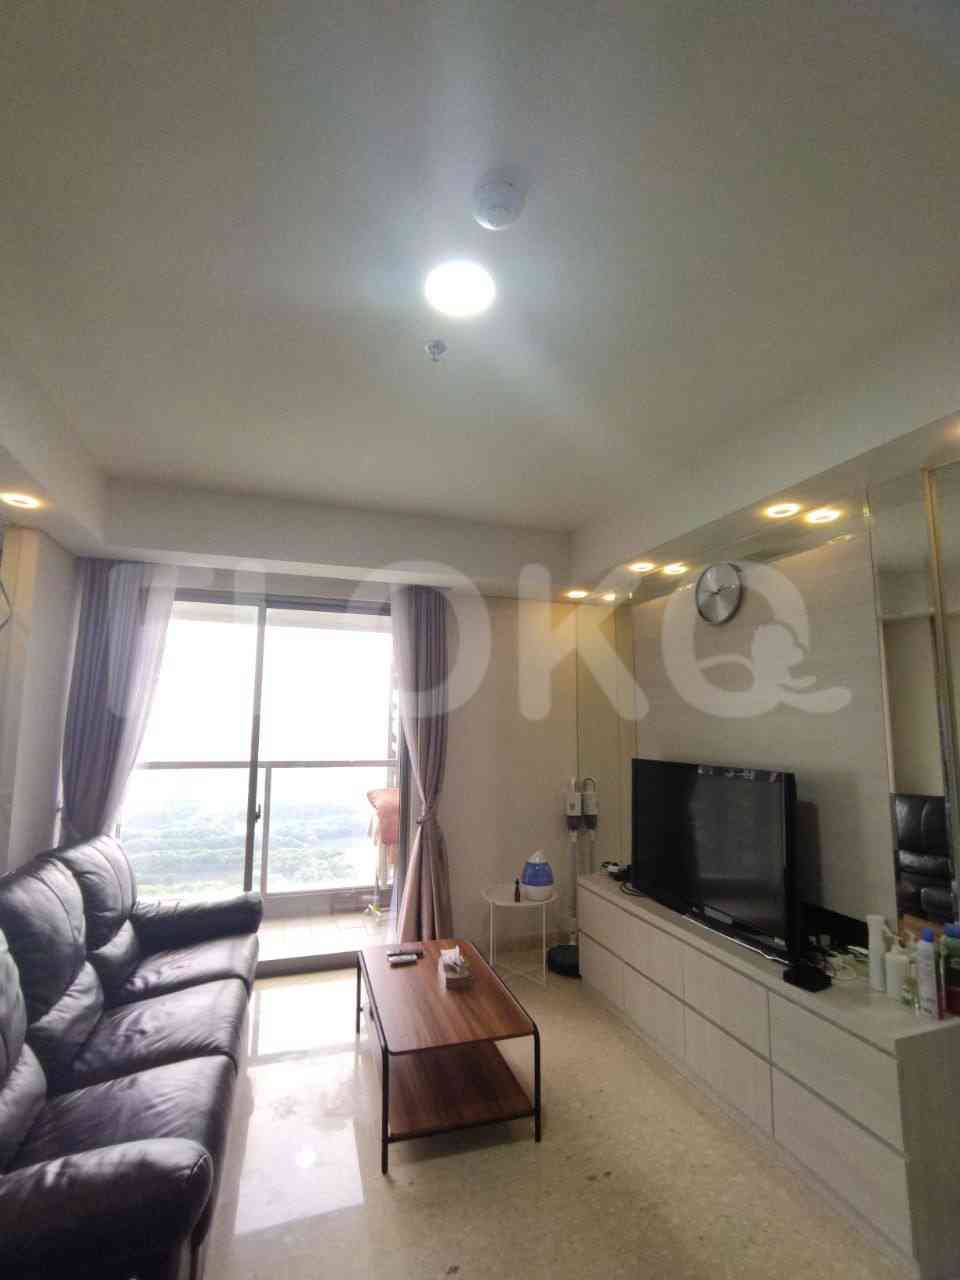 3 Bedroom on 25th Floor for Rent in Gold Coast Apartment - fka079 6